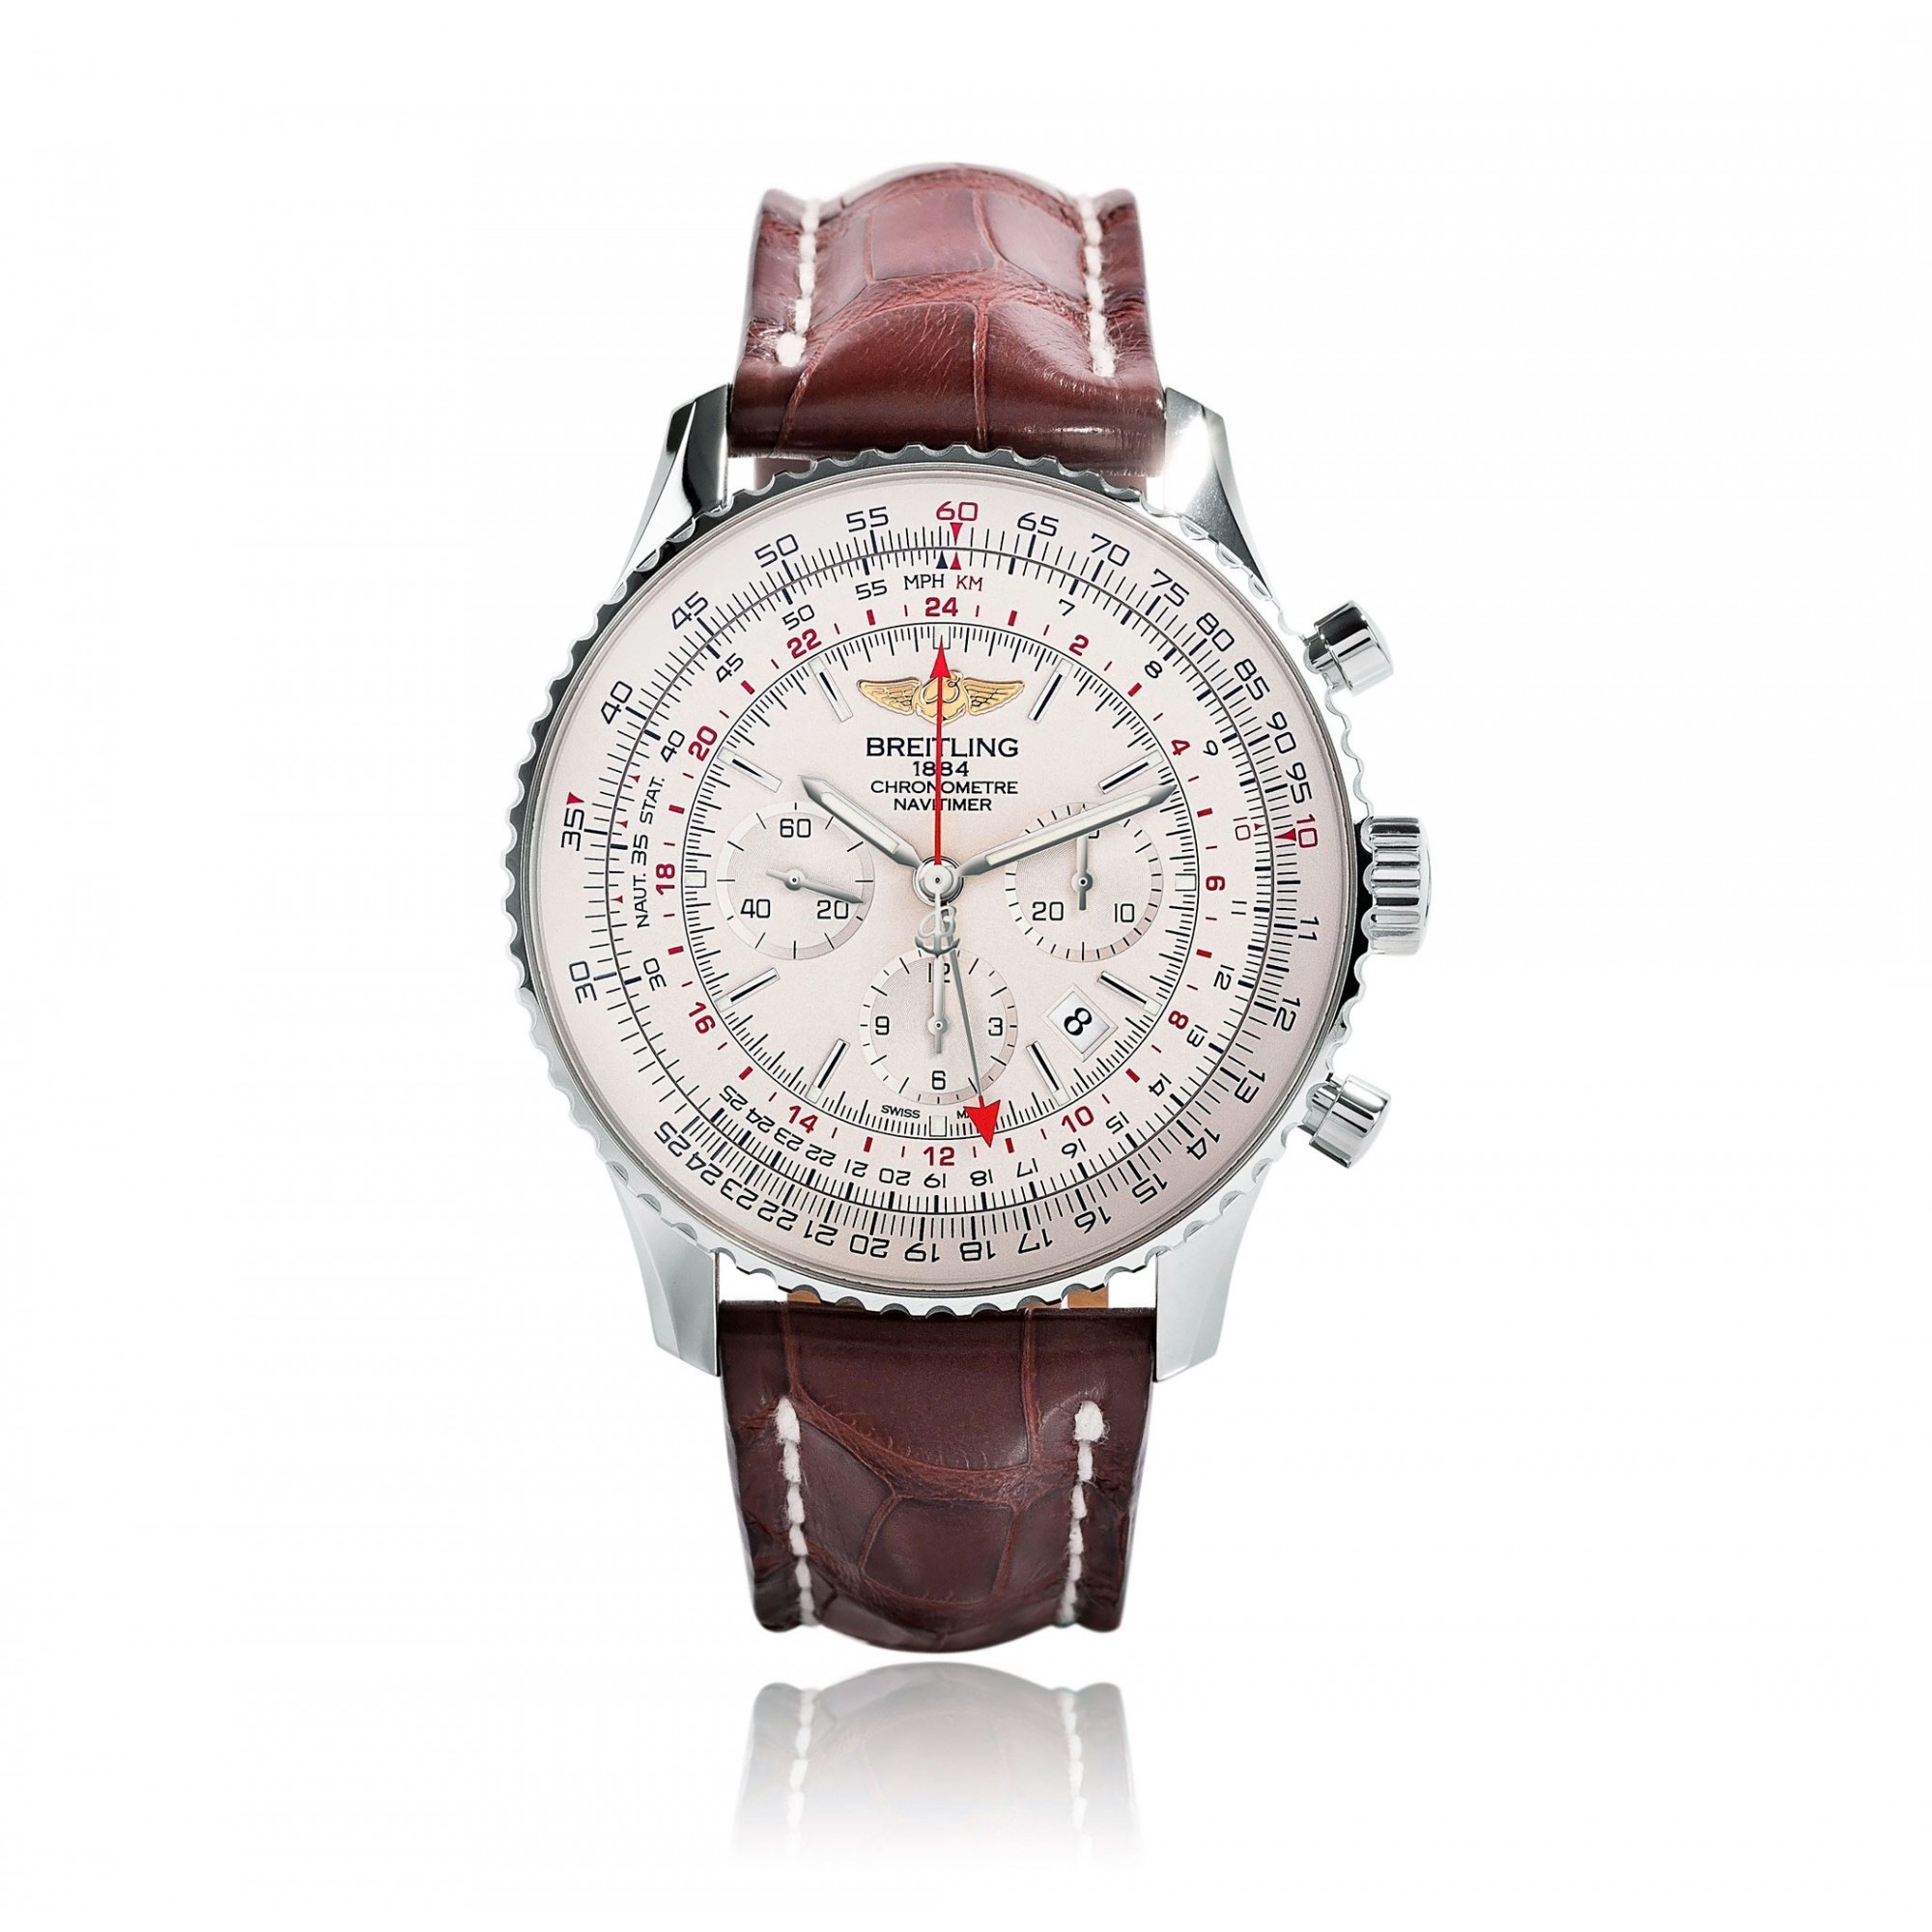 Breitling Navitimer - Page 1 - Watches - PistonHeads